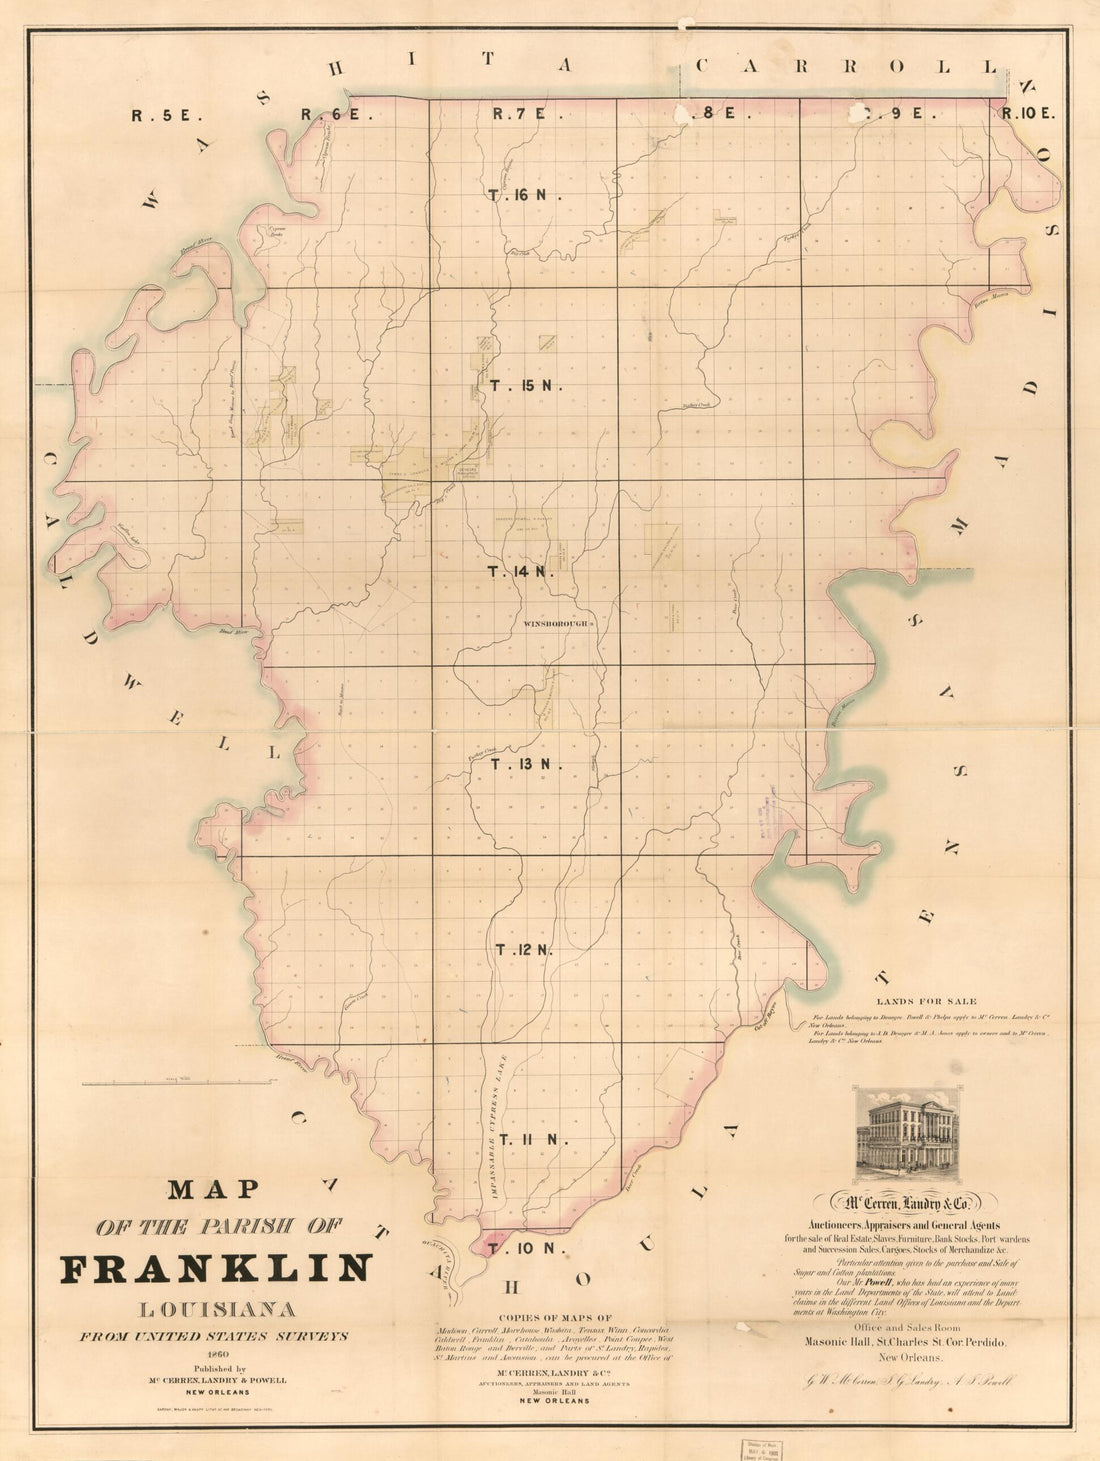 This old map of Map of the Parish of Franklin, Louisiana : from the United States Surveys from 1860 was created by Landry &amp; Powell McCerren in 1860